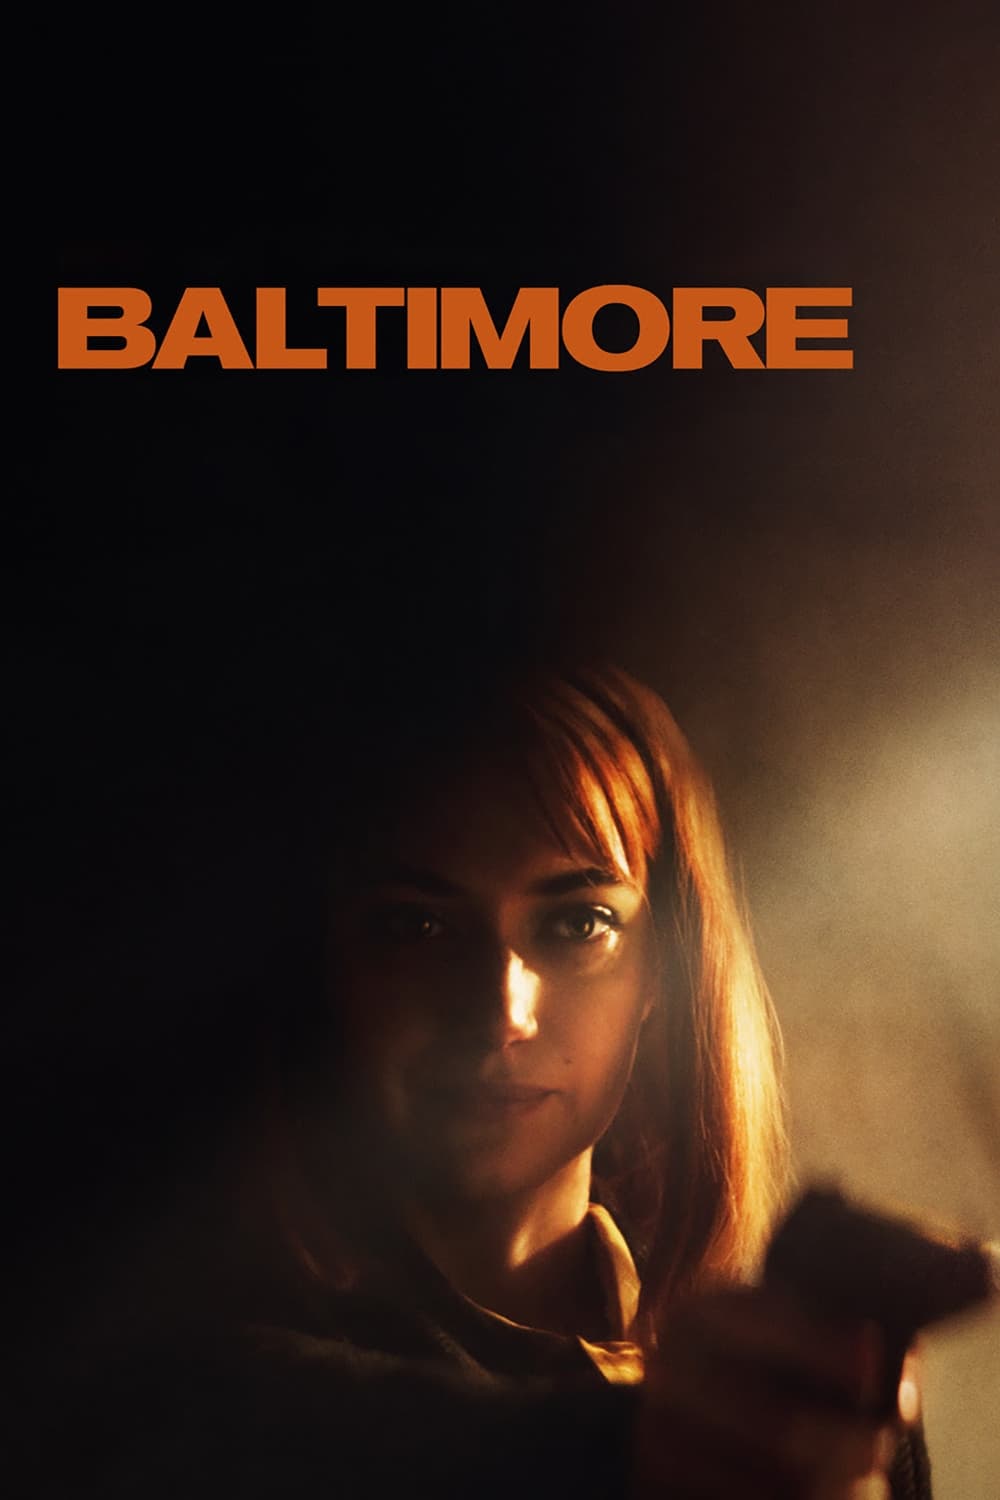 Poster for the movie "Baltimore"